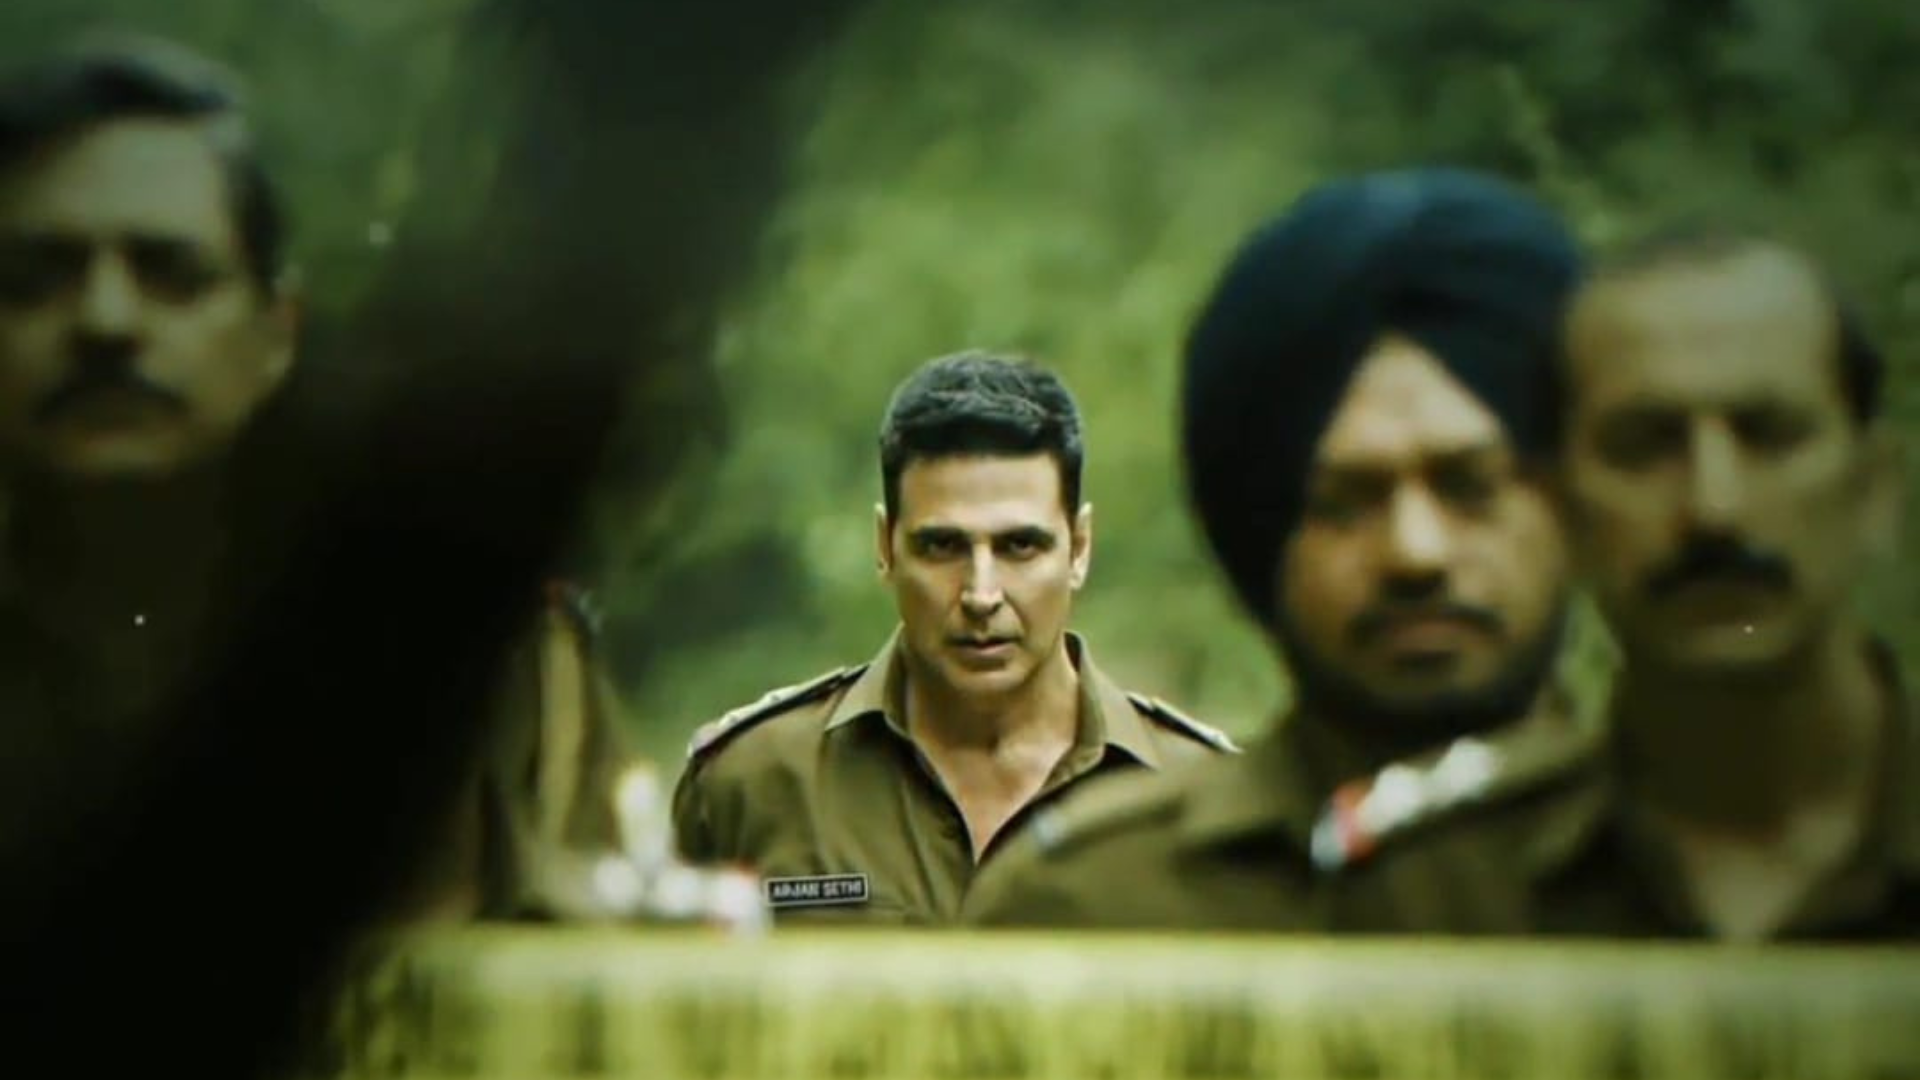 Akshay Kumar to play a no-nonsense cop in upcoming thriller Cuttputtli,  first look out - WATCH